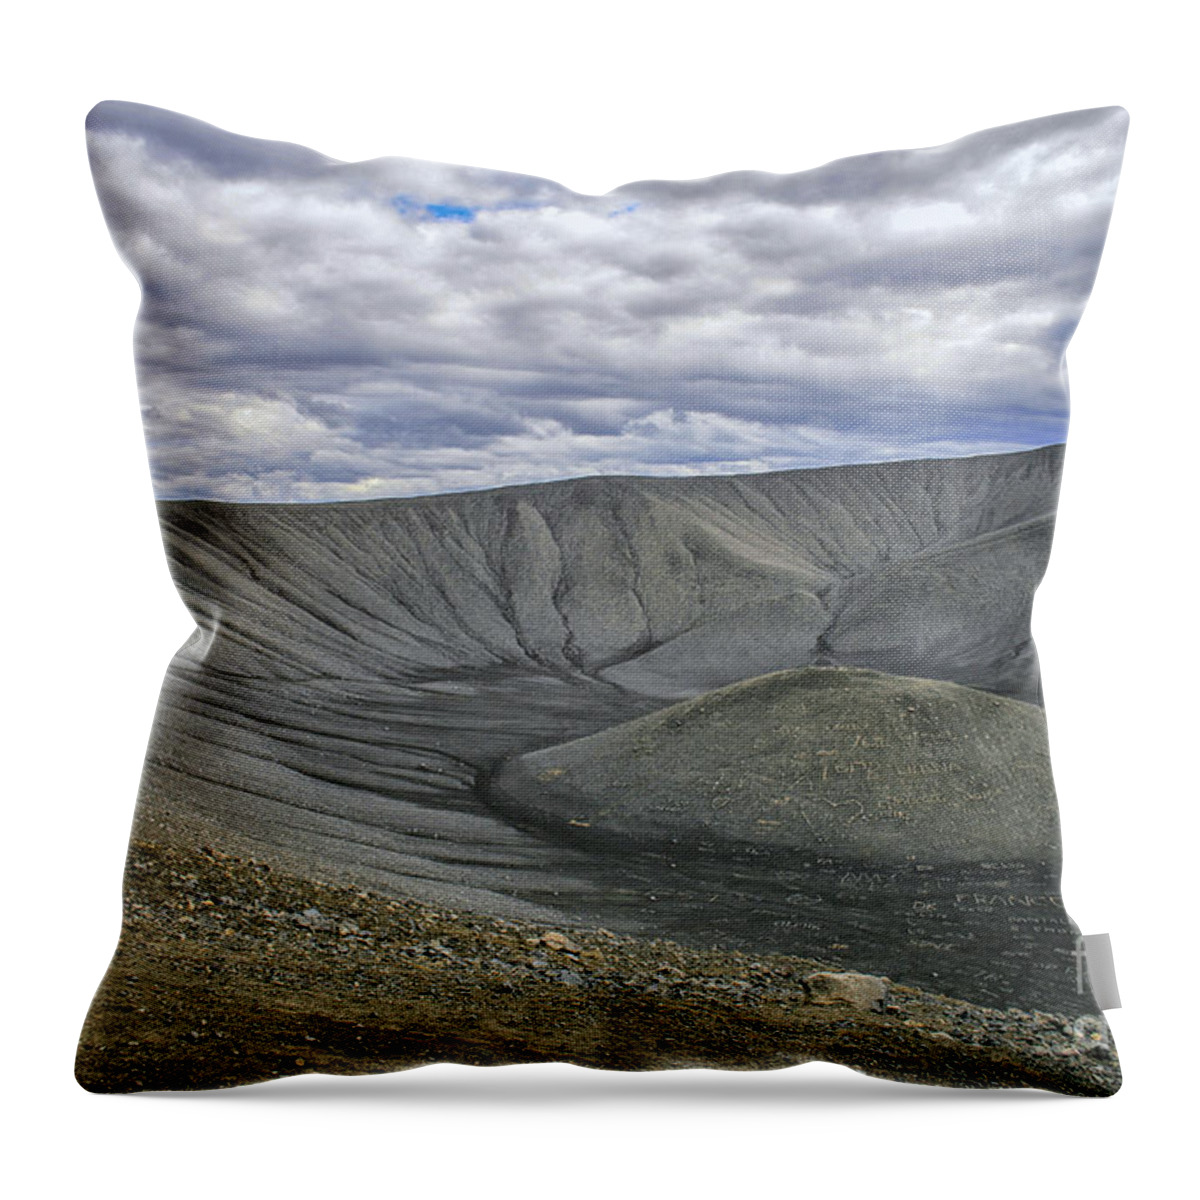 Crater Throw Pillow featuring the photograph Crater by Patricia Hofmeester